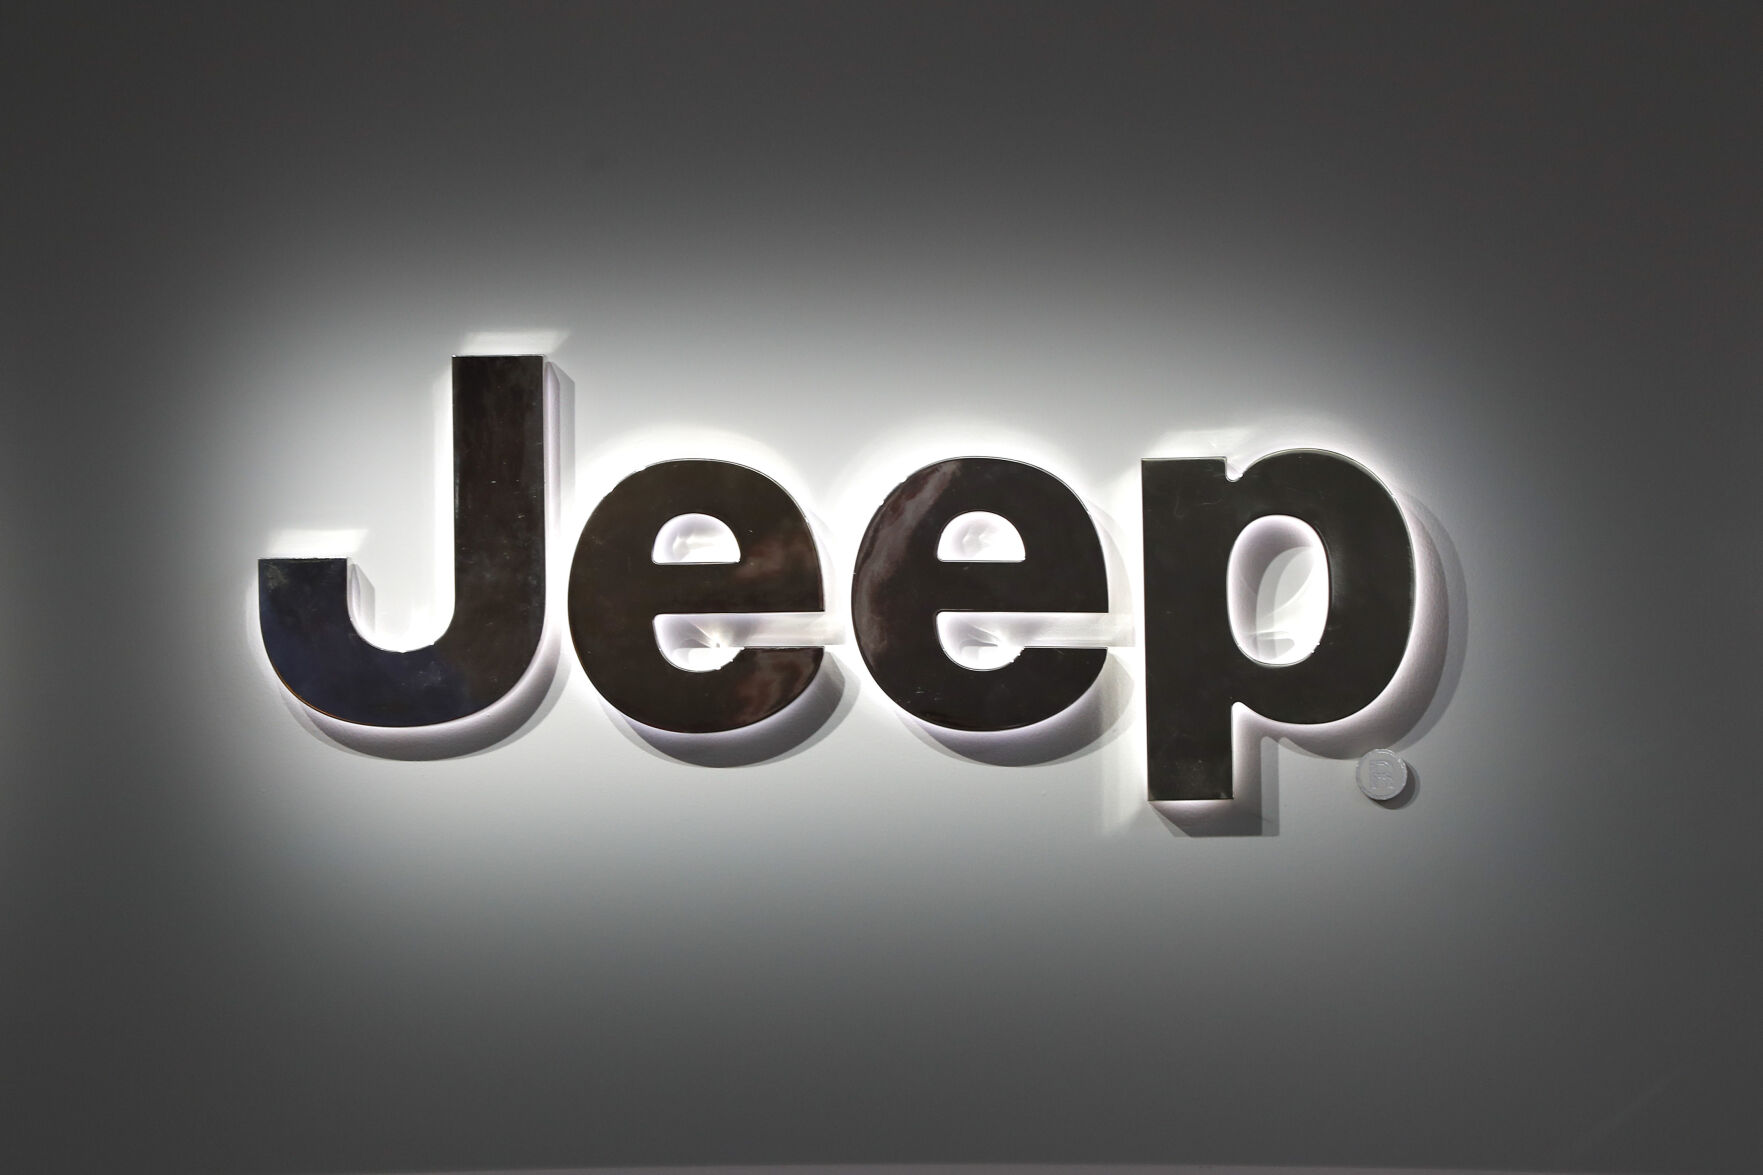 <p>FILE - This Jan. 14, 2019 photo shows a Jeep logo at the North American International Auto Show in Detroit. Stellantis is recalling more than 354,000 Jeeps worldwide, Tuesday, June 13, 2023, because the rear coil springs can fall off while they’re being driven. The recall covers certain 2022 and 2023 Grand Cherokee and 2021 to 2023 Grand Cherokee L SUVs. (AP Photo/Paul Sancya, File)</p>   PHOTO CREDIT: Paul Sancya 